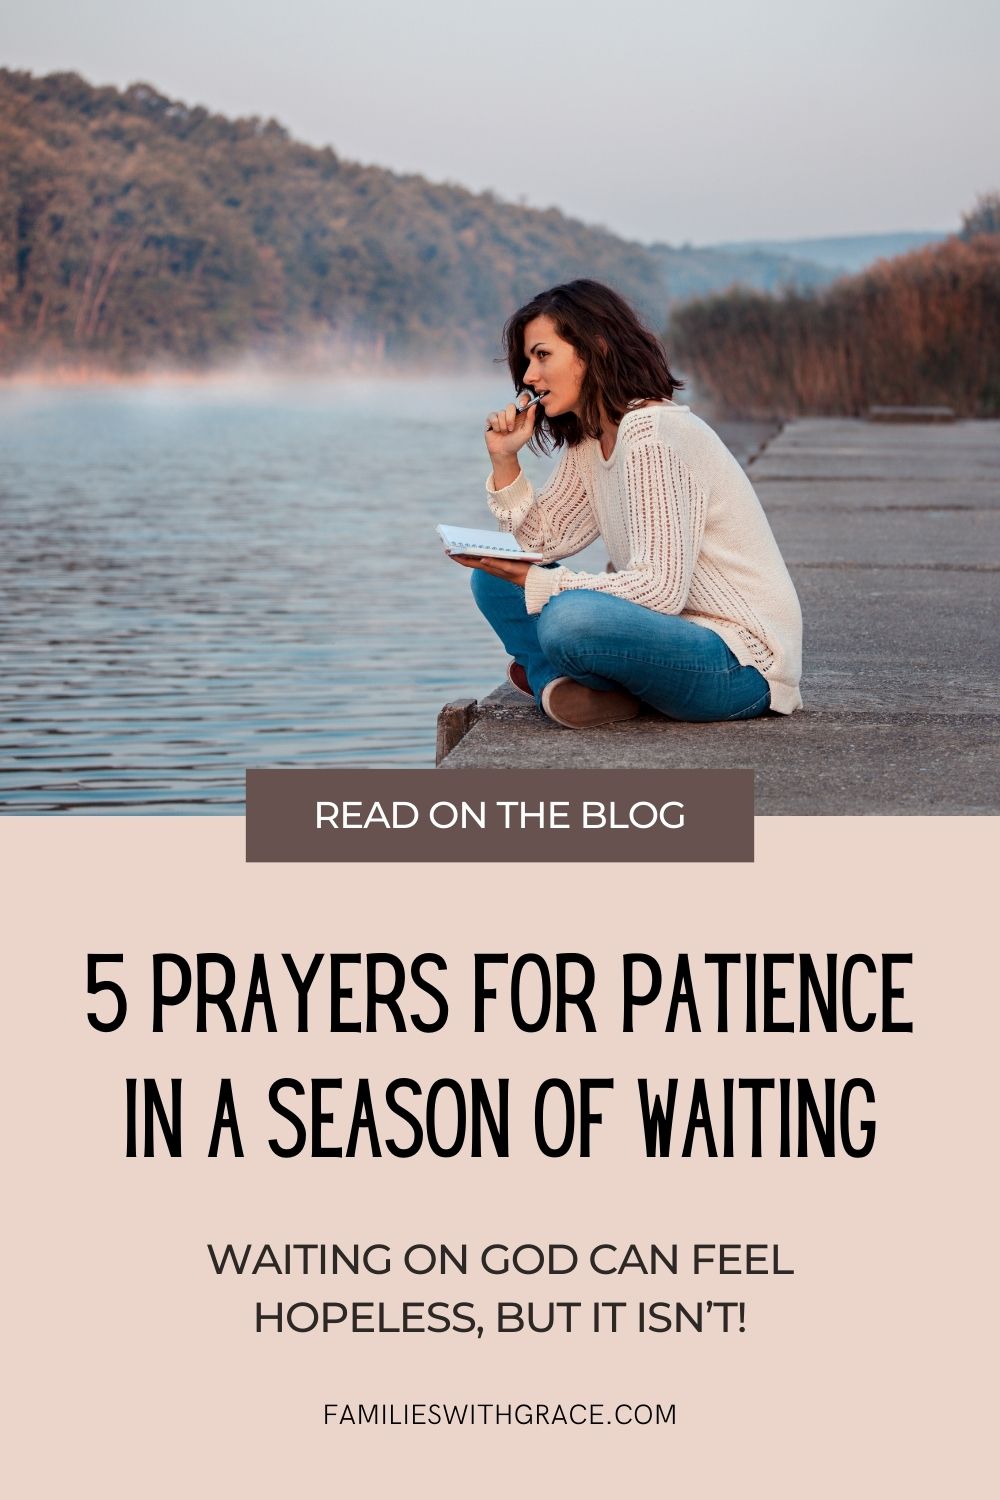 5 Prayers for patience in a season of waiting